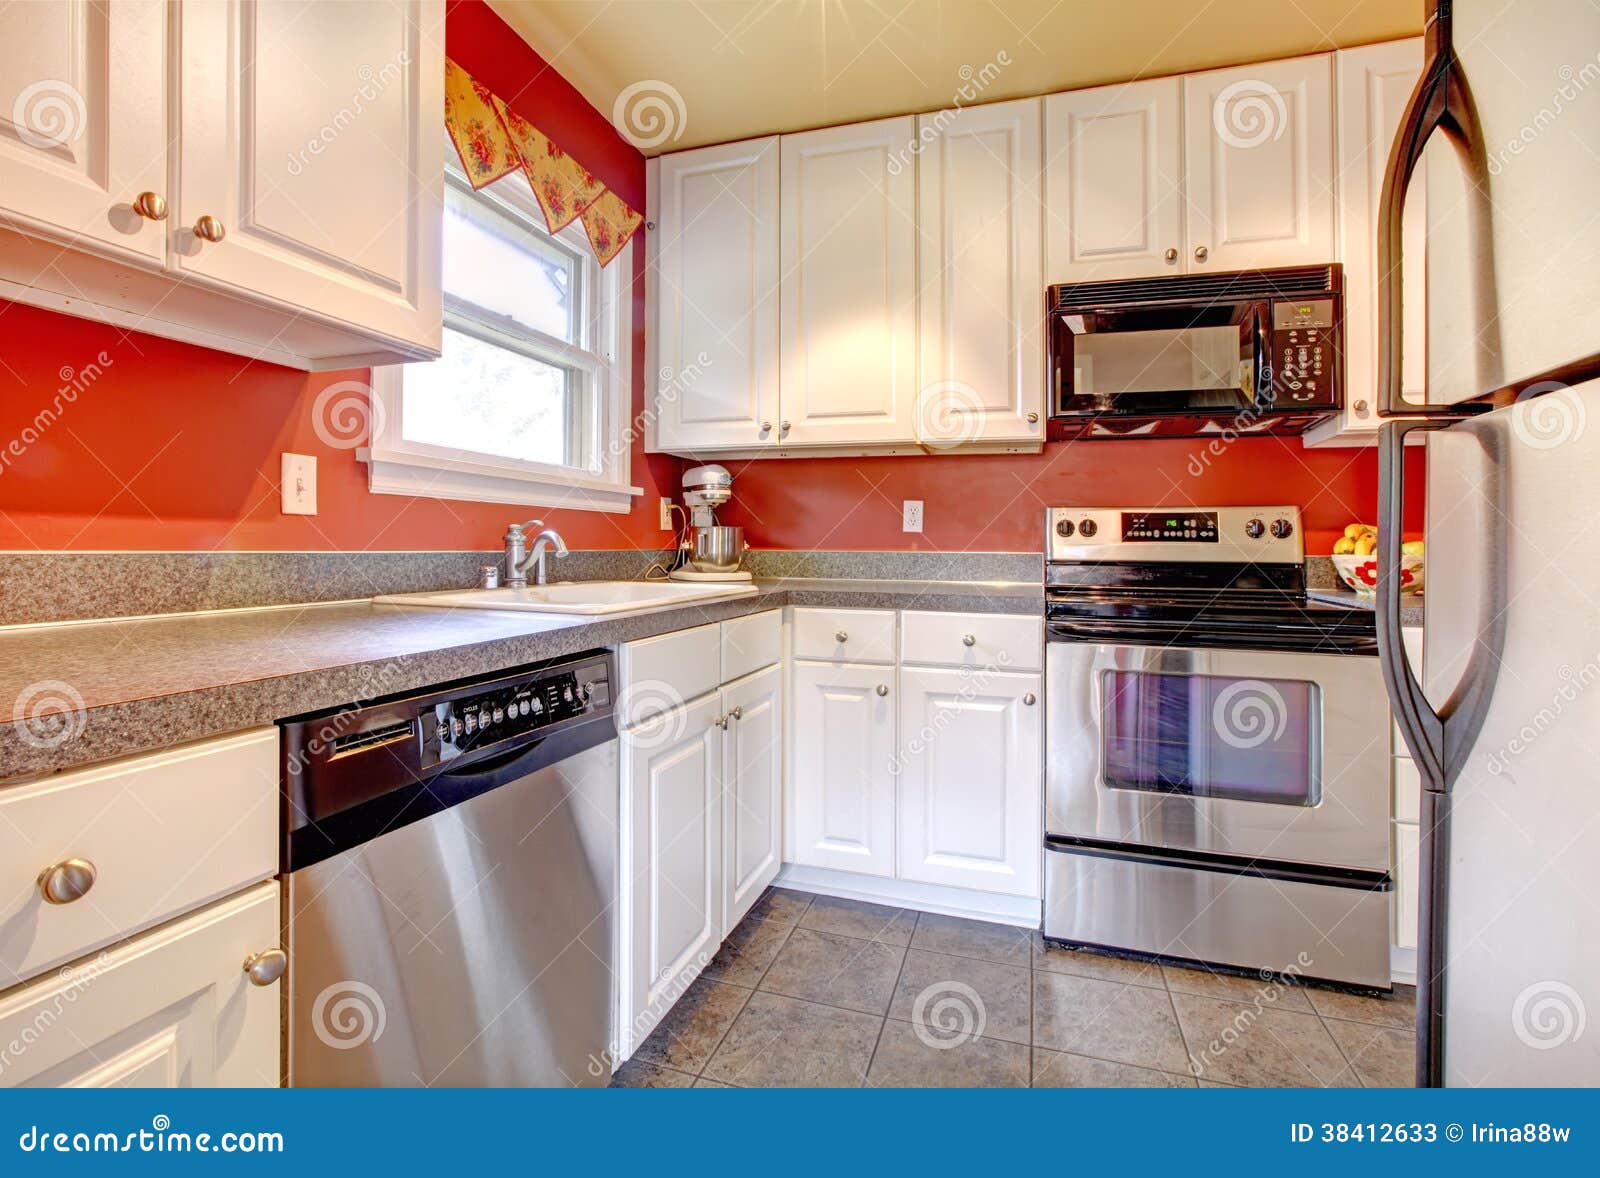 Cozy Kitchen Room with Red Wall and White Cabinets Stock Image - Image